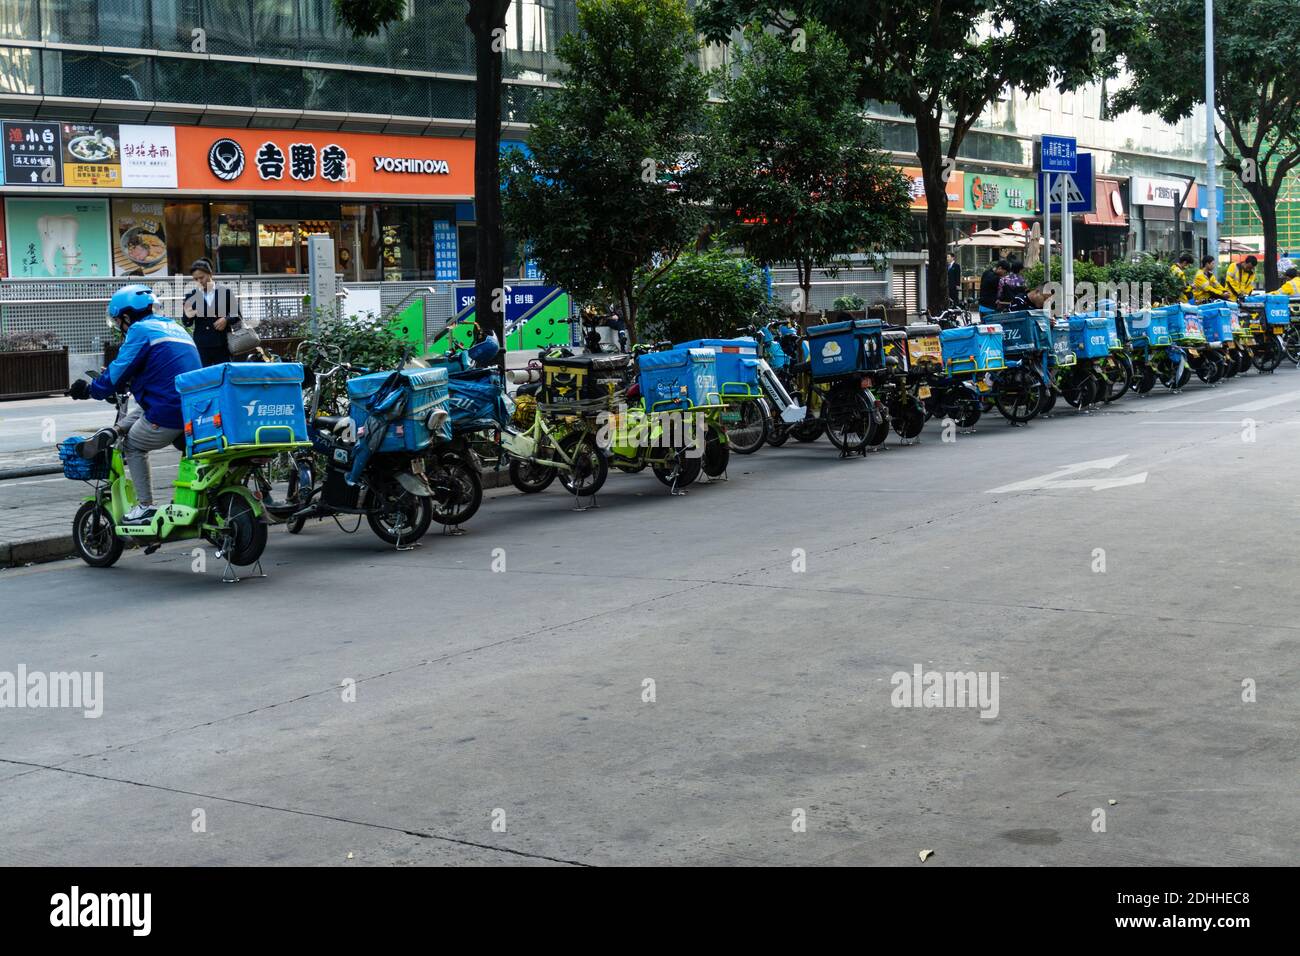 Food delivery bikes for Eleme delivery lined up and ready to go in China Stock Photo